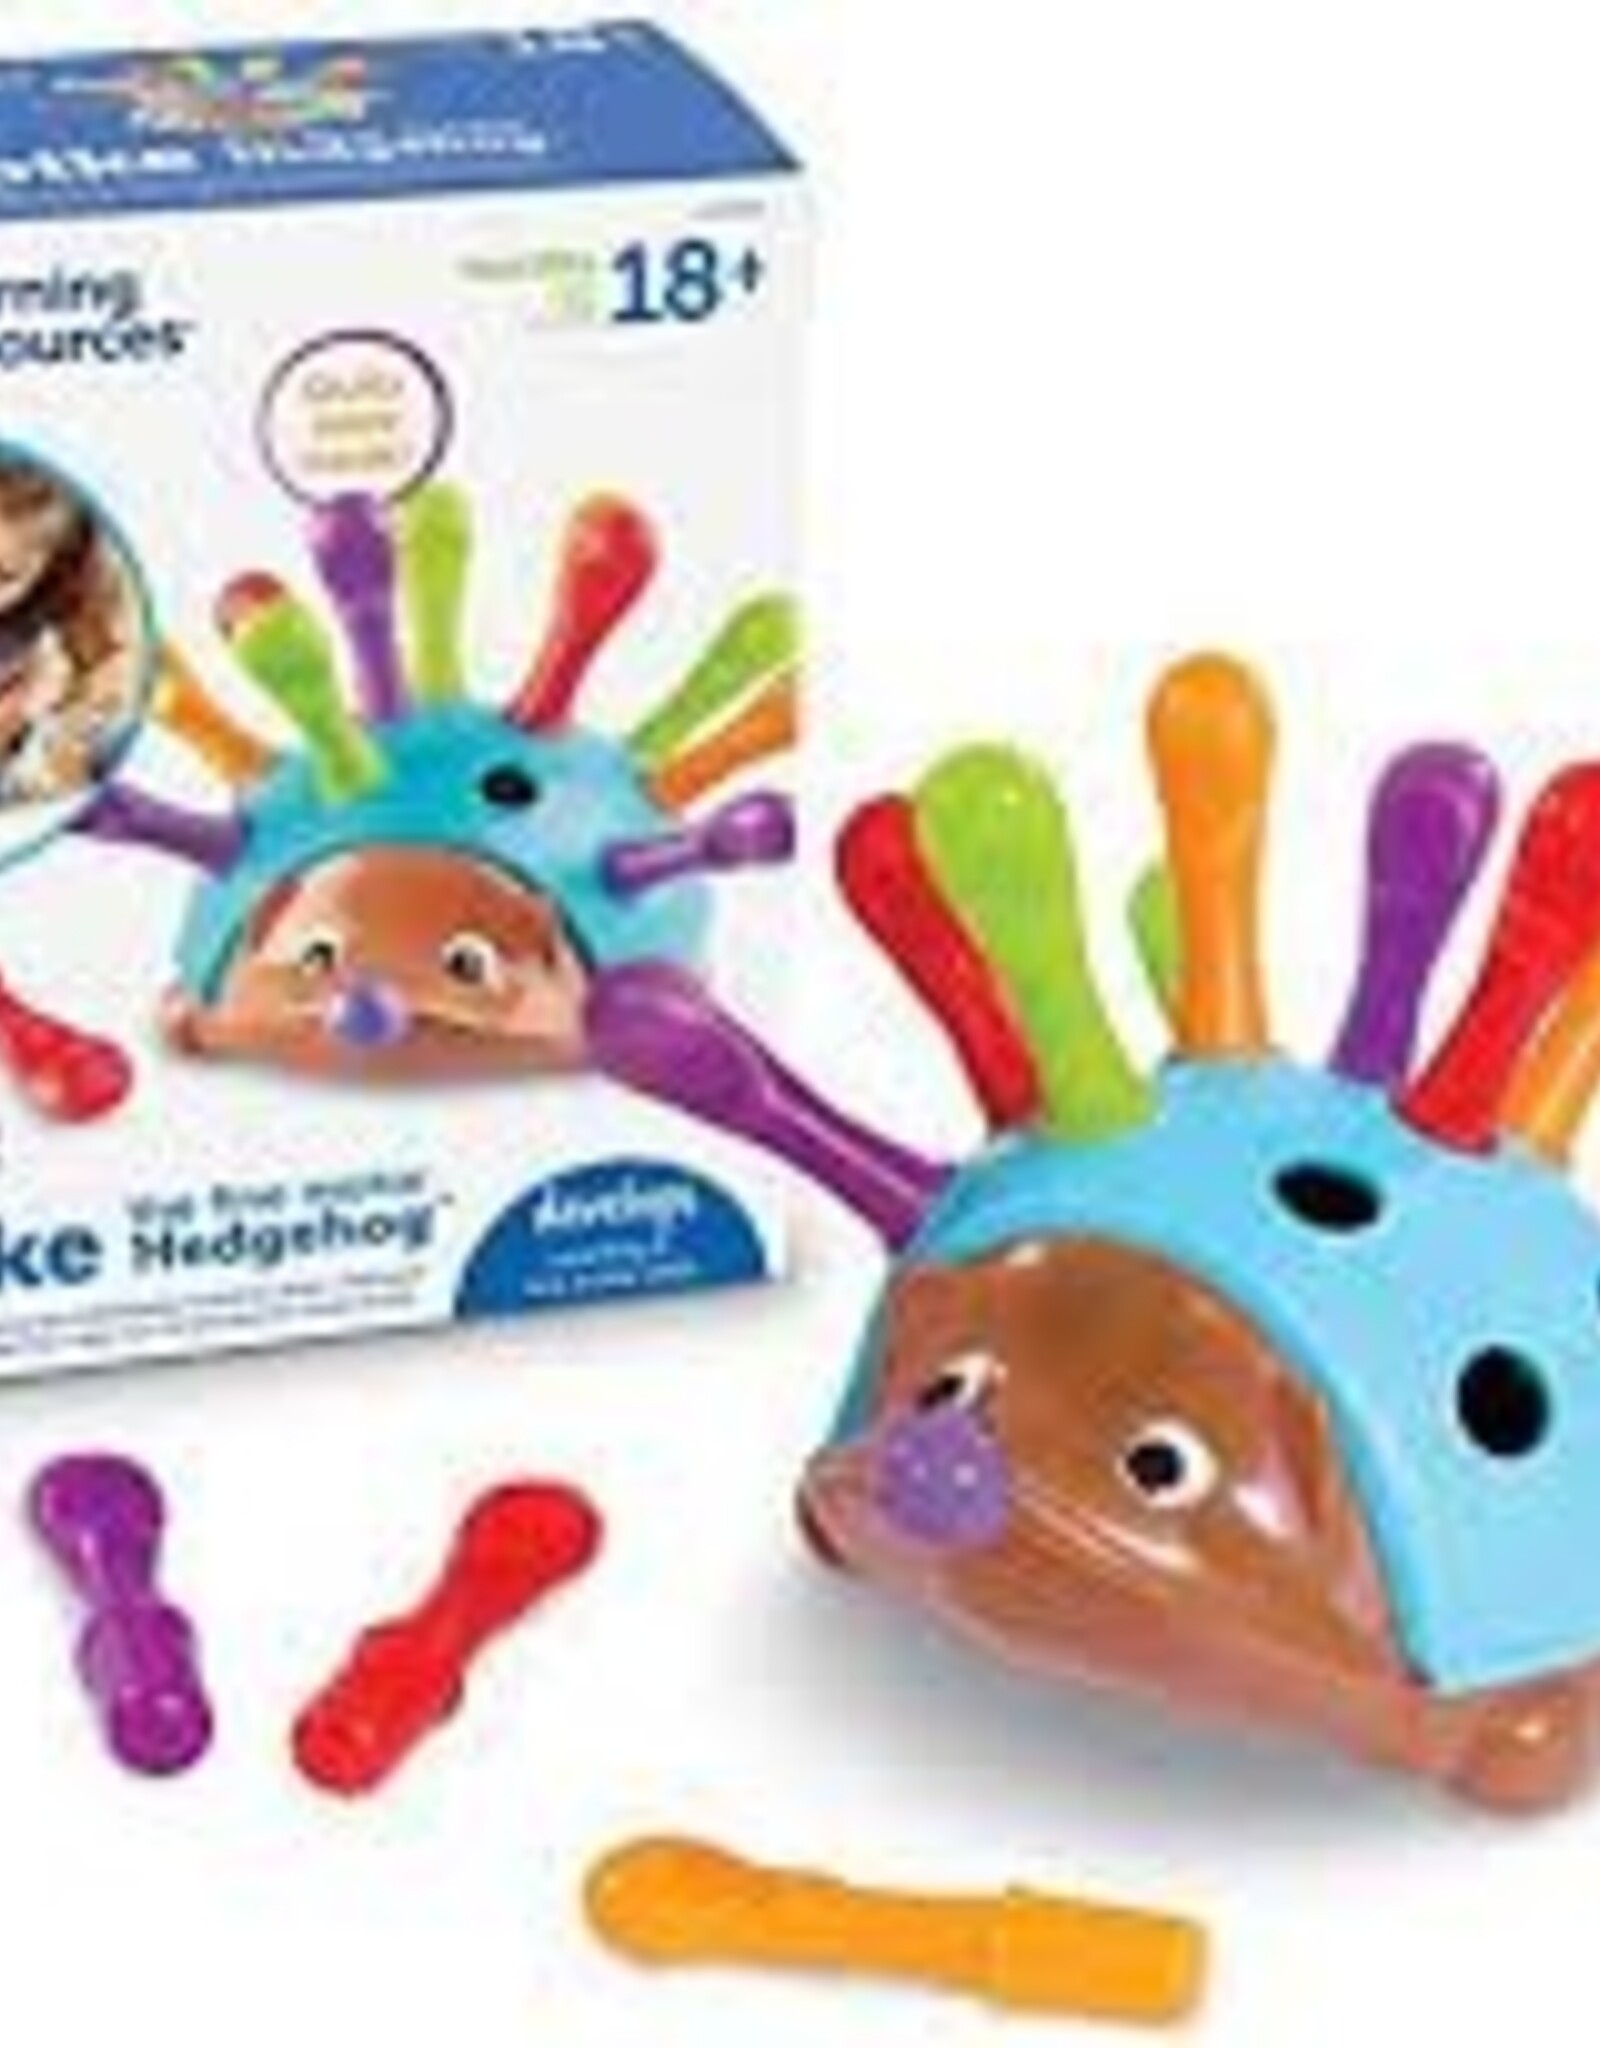 LEARNING EDUCATIONAL SPIKE THE FINE MOTOR HEDGEHOG TISSUE TIME